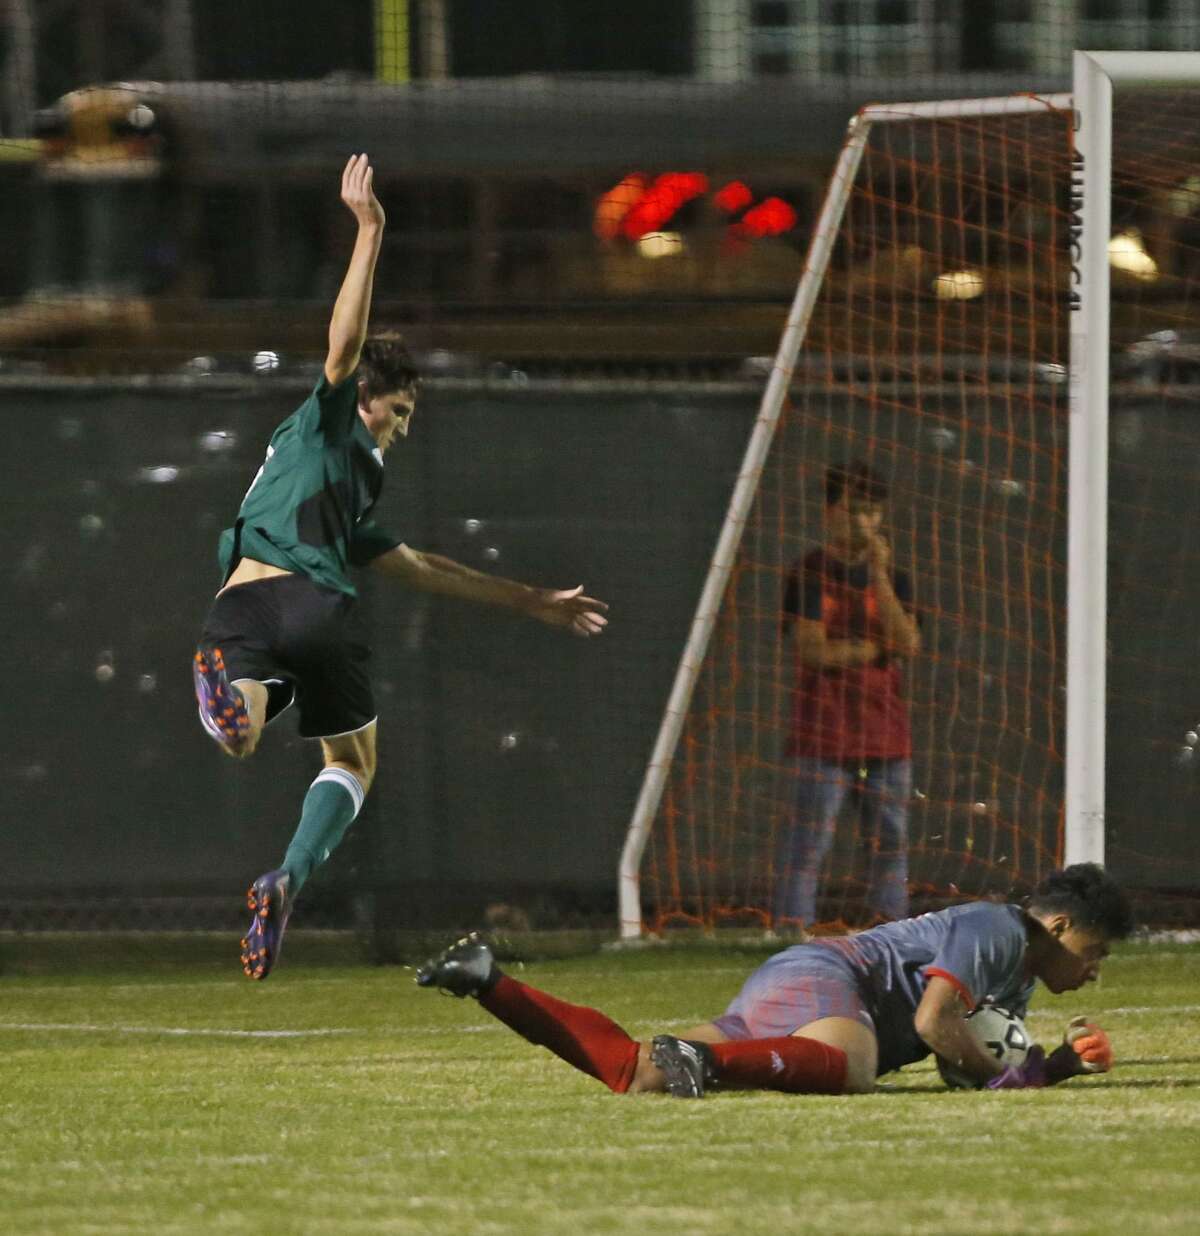 ReaganÕs Shane Malone tries to score over Lee goalie Abisal Ortiz in the District 26-6A boys soccer game between Reagan and Lee on Tuesday, February 7, 2017 at Blossom Soccer Stadium-West